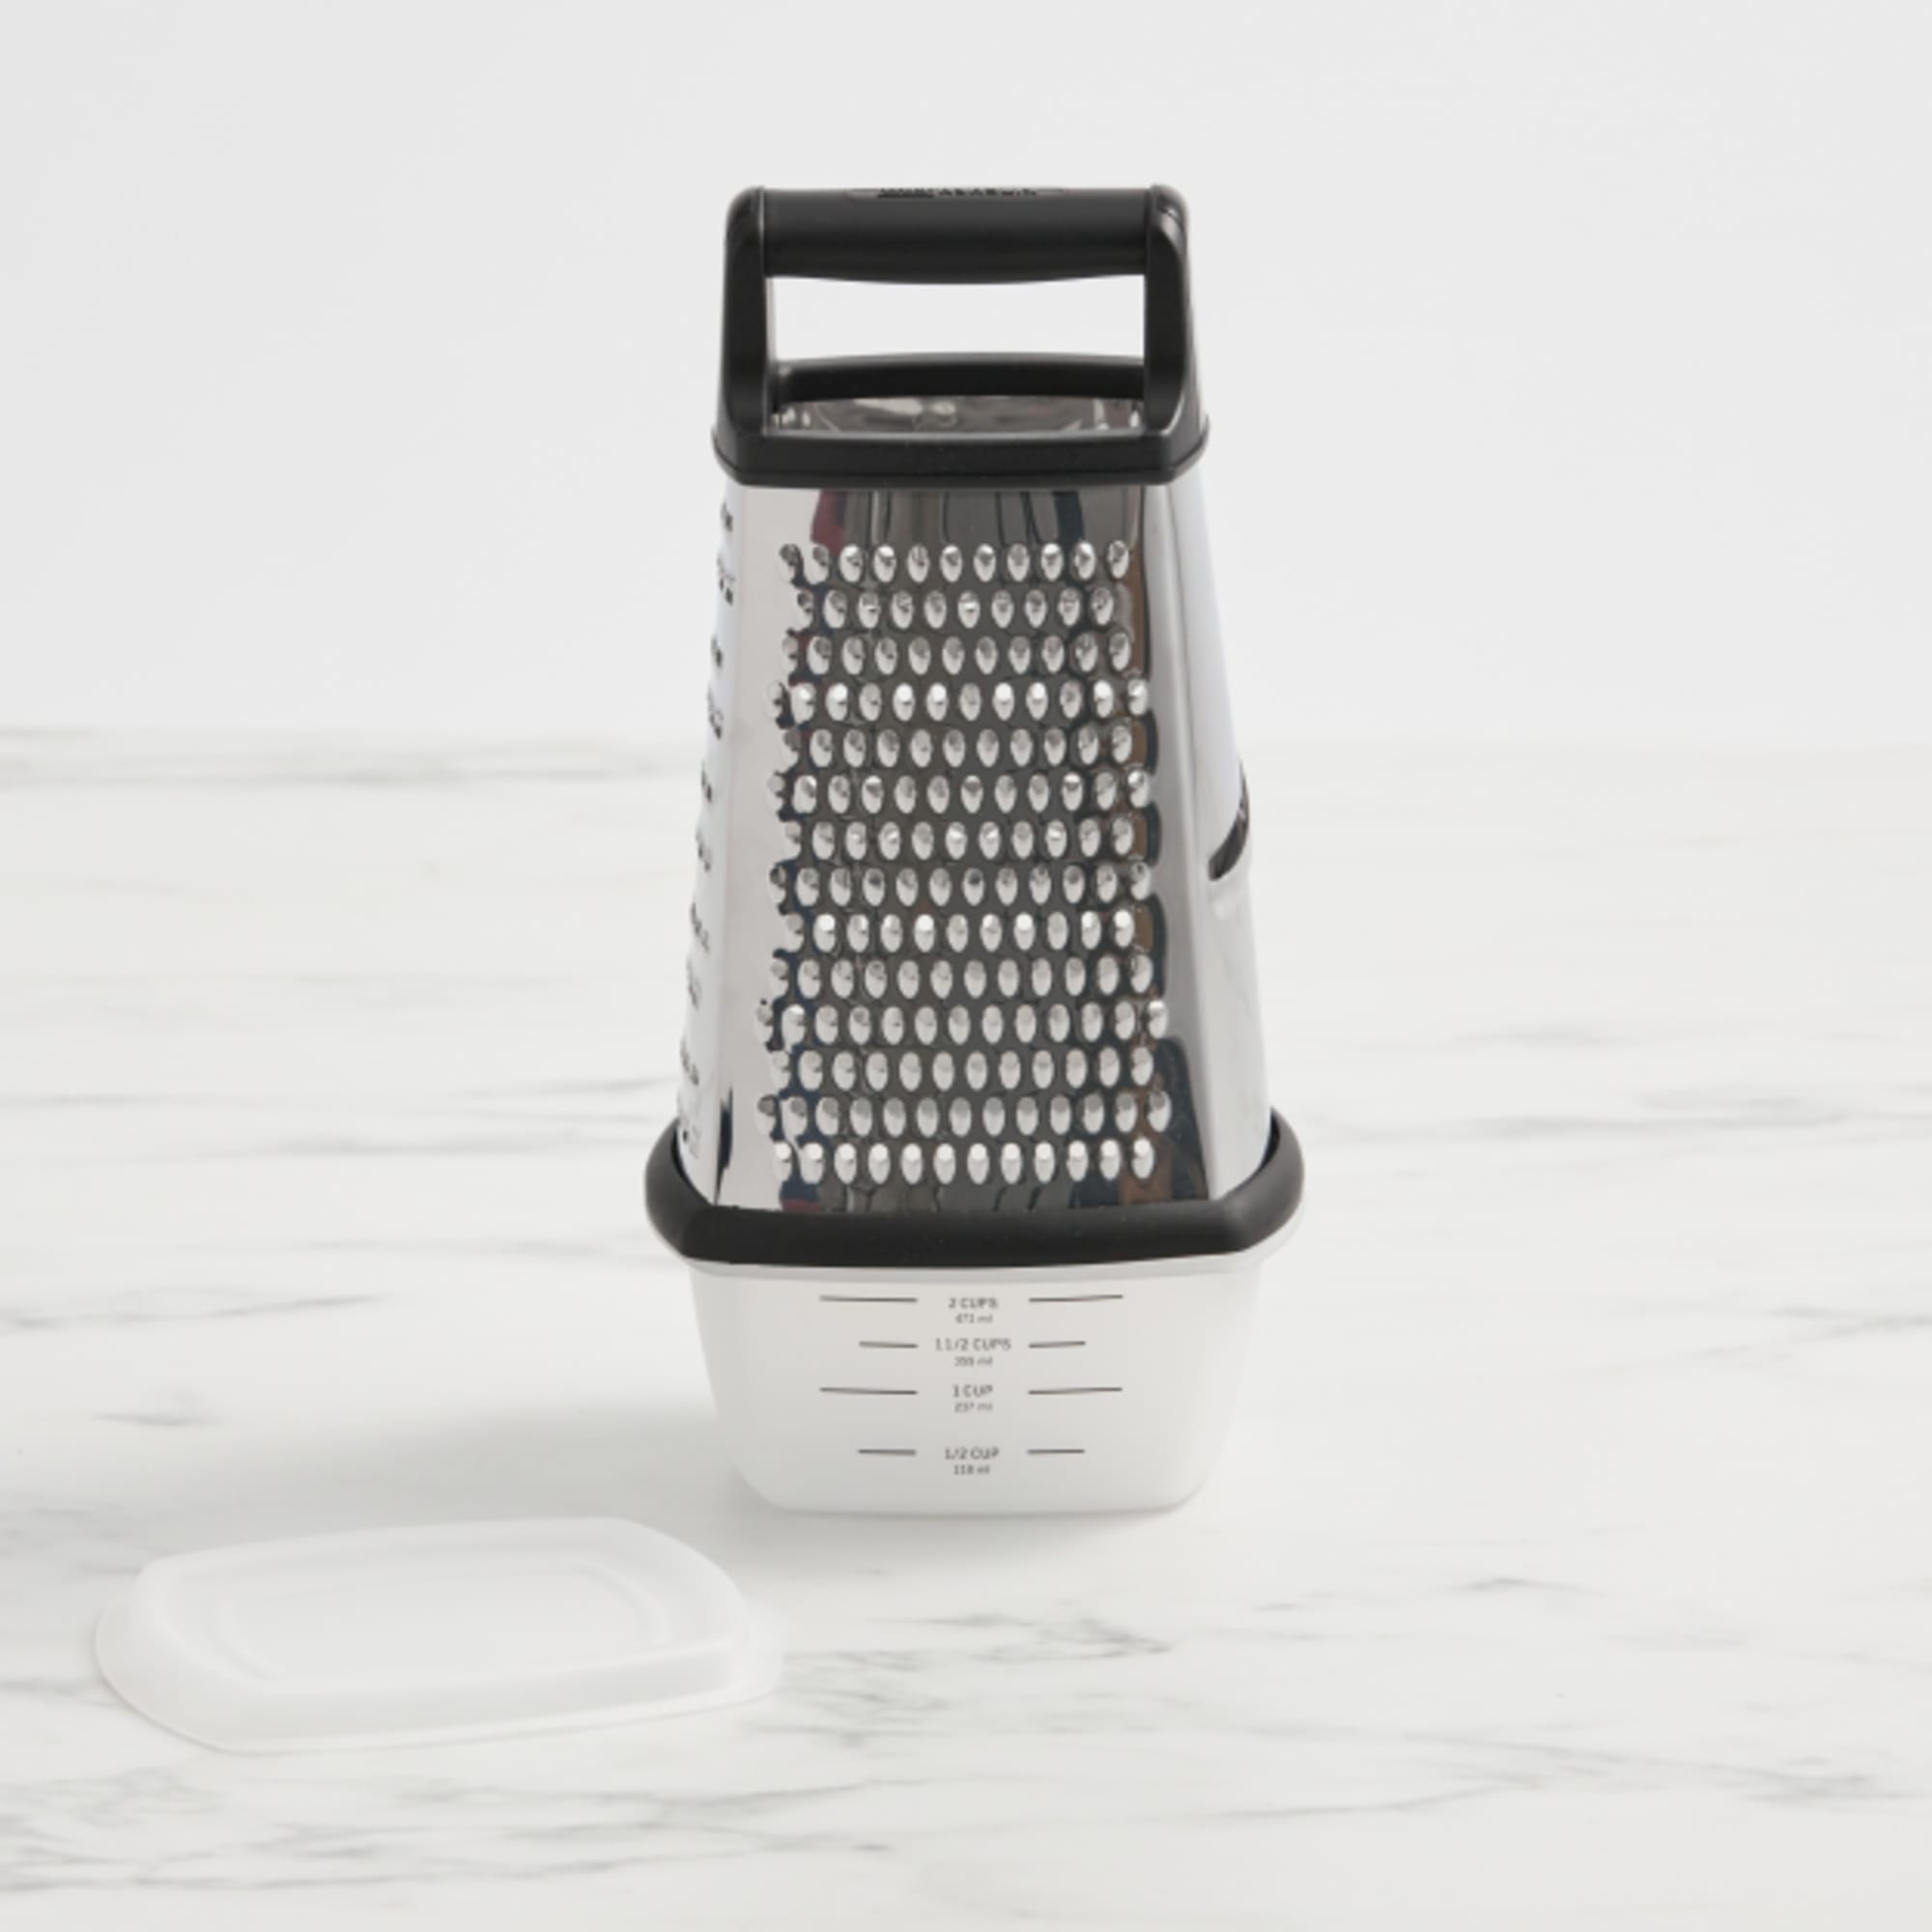 https://res.cloudinary.com/kitchenwarehouse/image/upload/c_fill,g_face,w_625/f_auto/t_PDP_2000x2000/Kitchen%20Warehouse%20Images%20/Kitchen-Pro-Ergo-Etched-Box-Grater-H_2.jpg